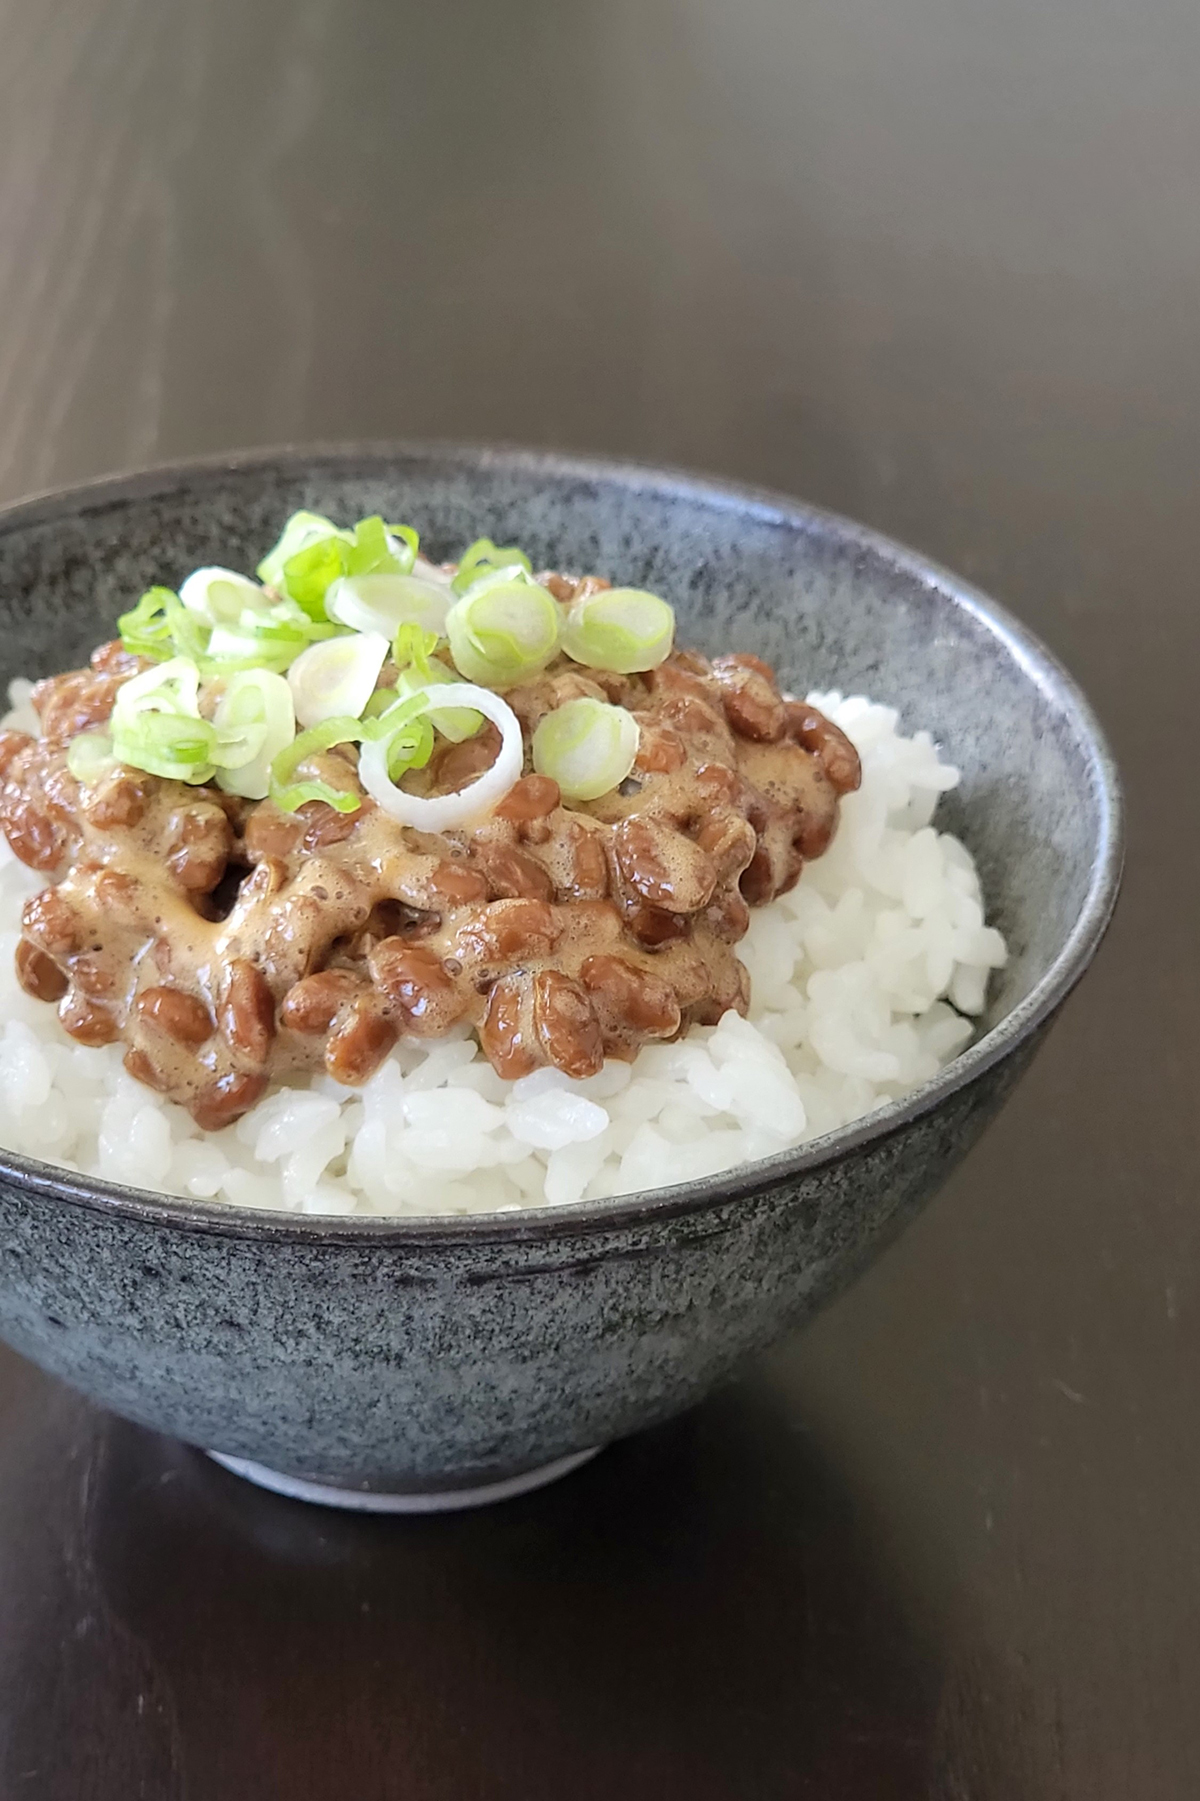 What Is Natto Fermented Soybeans and Should You Try It?